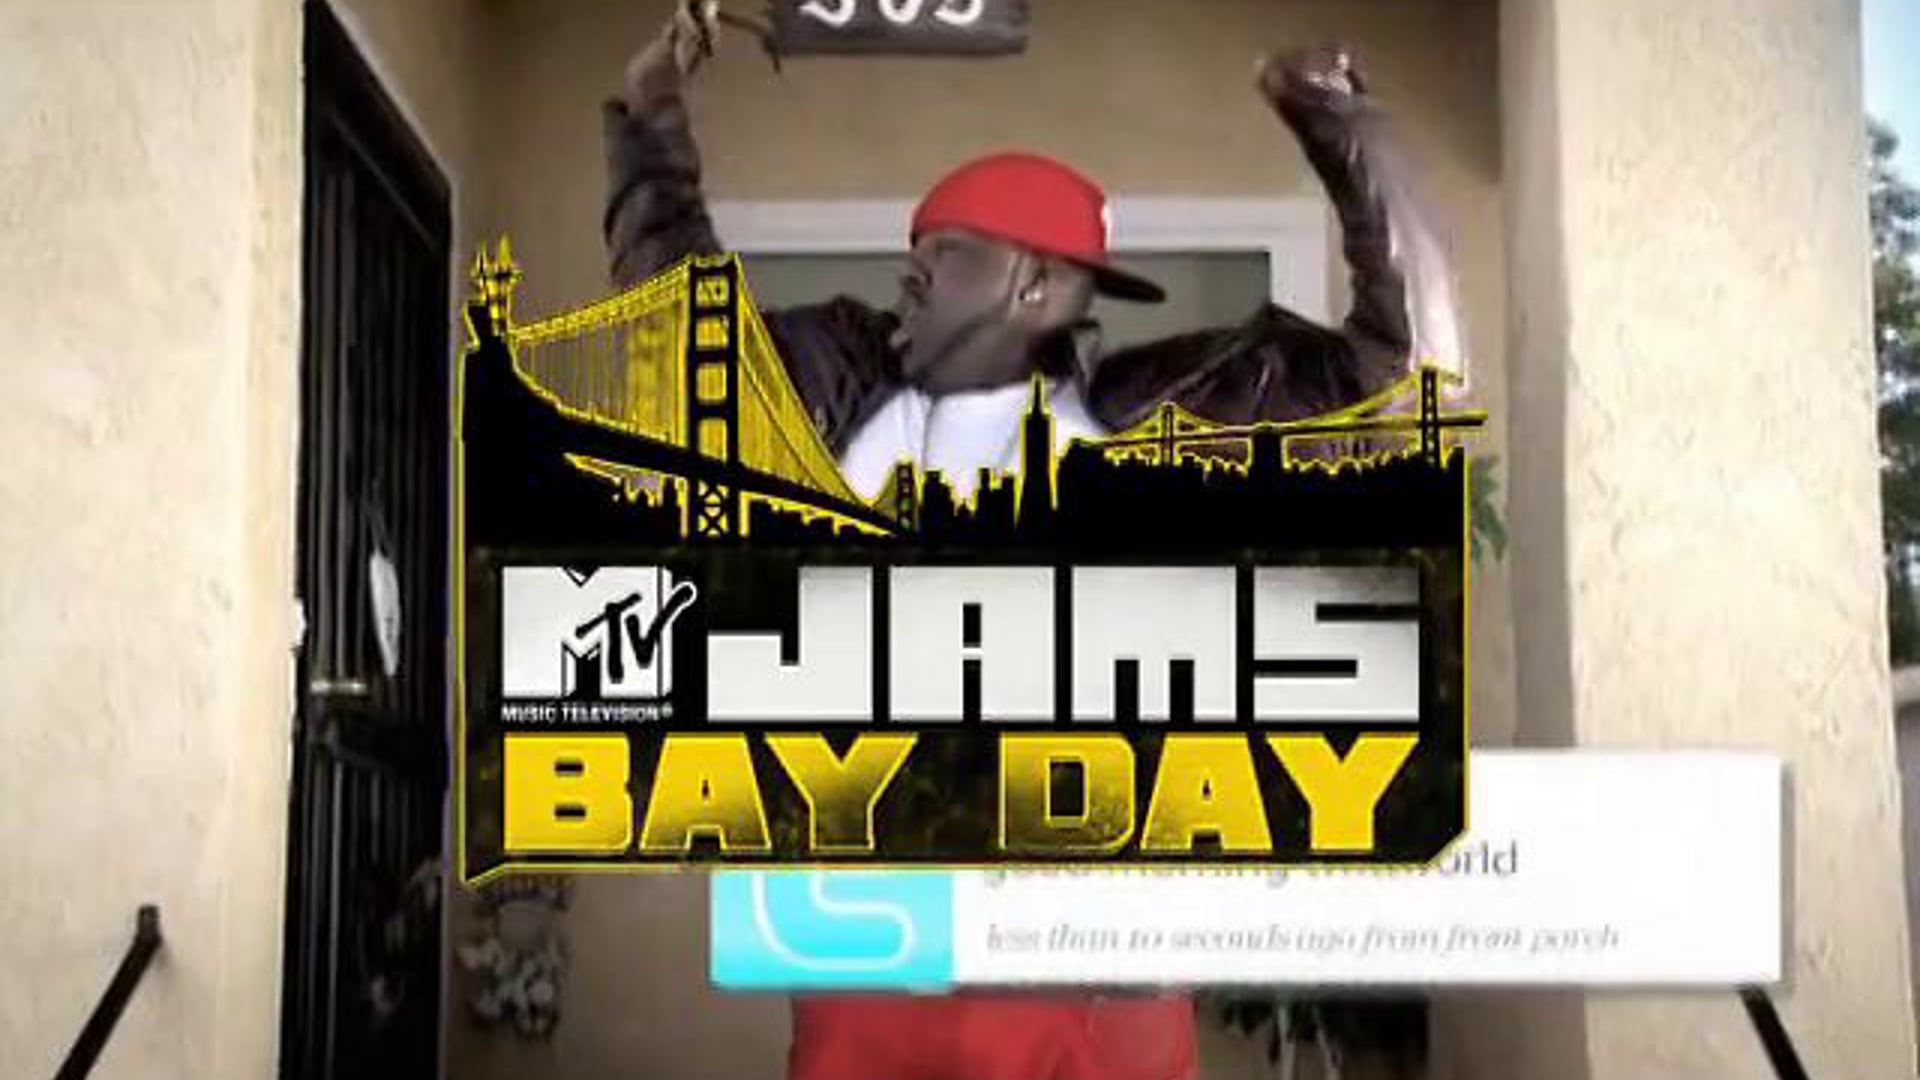 MTV JAMS "BAY DAY" OFFICIAL INTRO